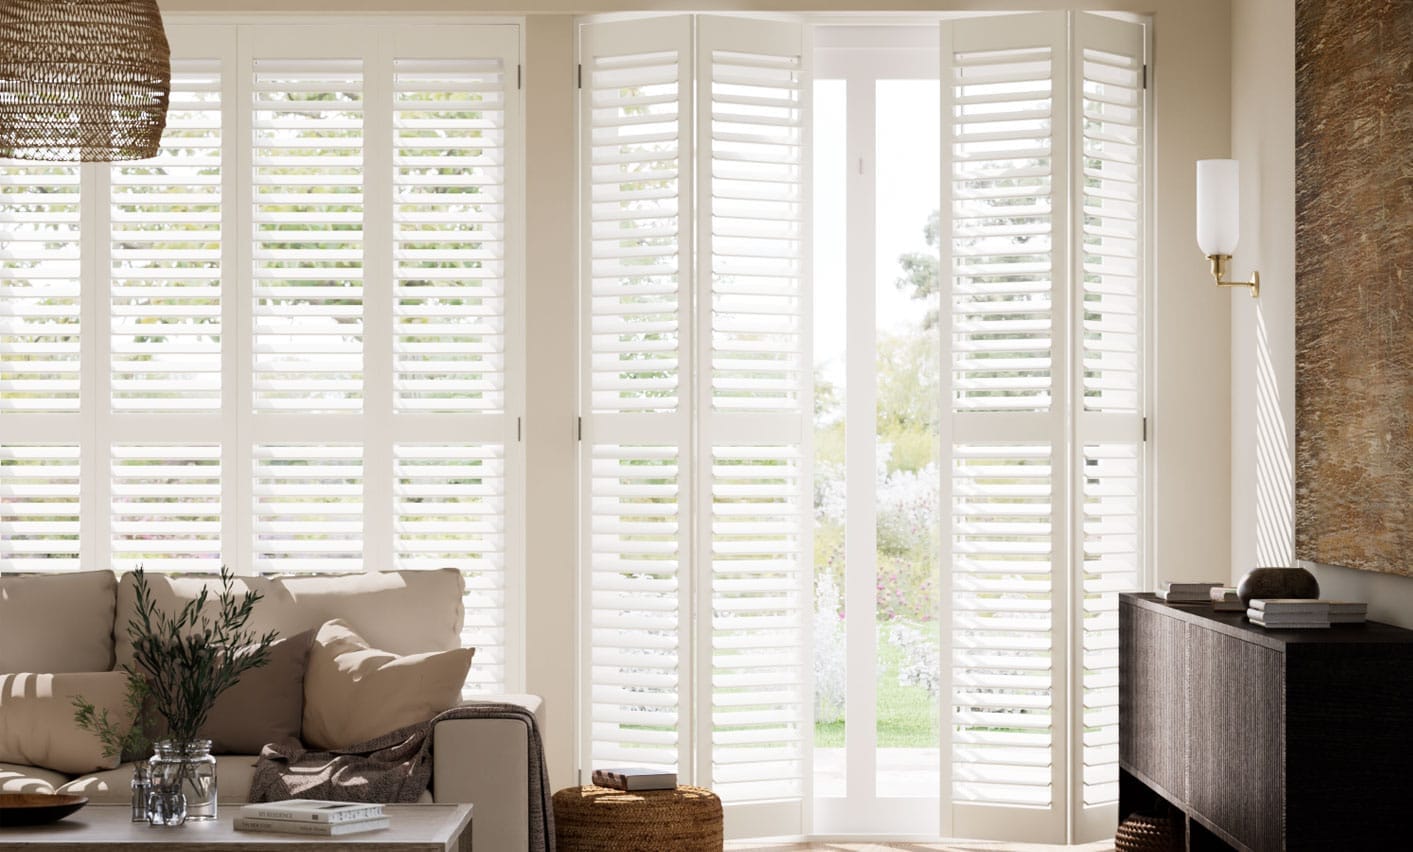 Shutter Blinds Stylish Waterproof Made To Measure